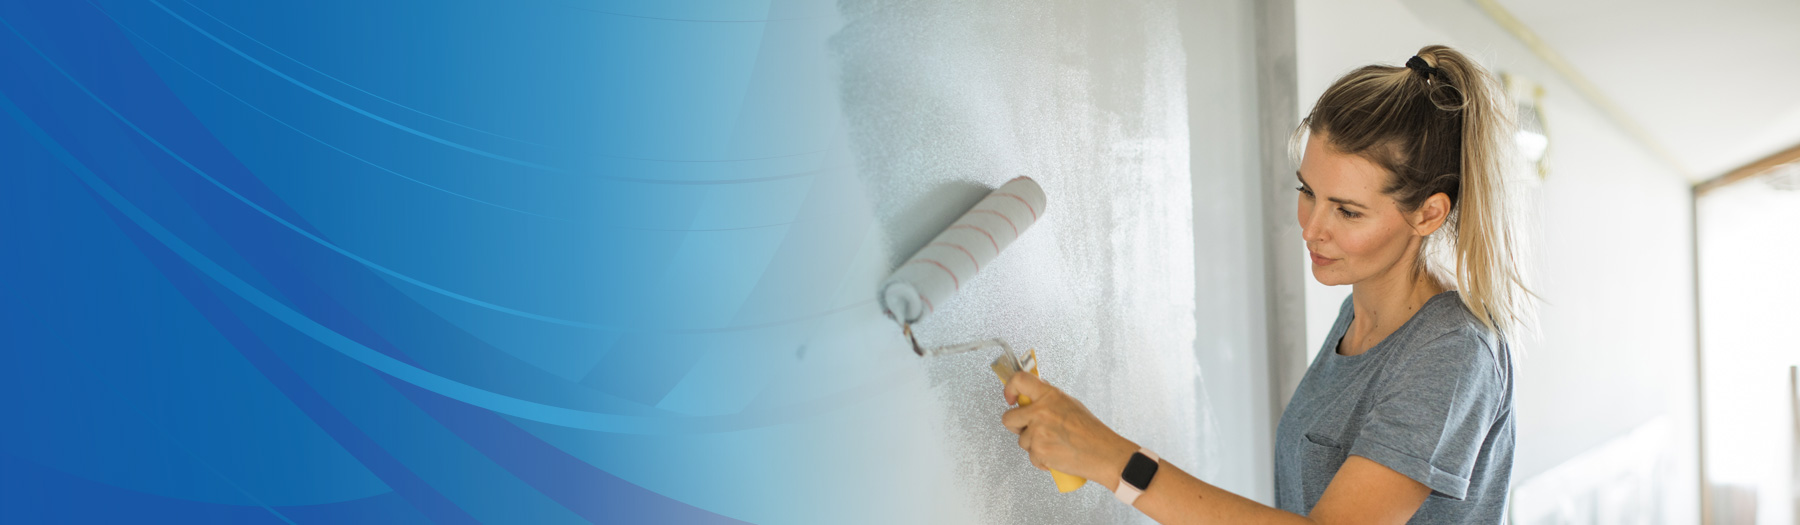 Woman painting wall with a paint roller